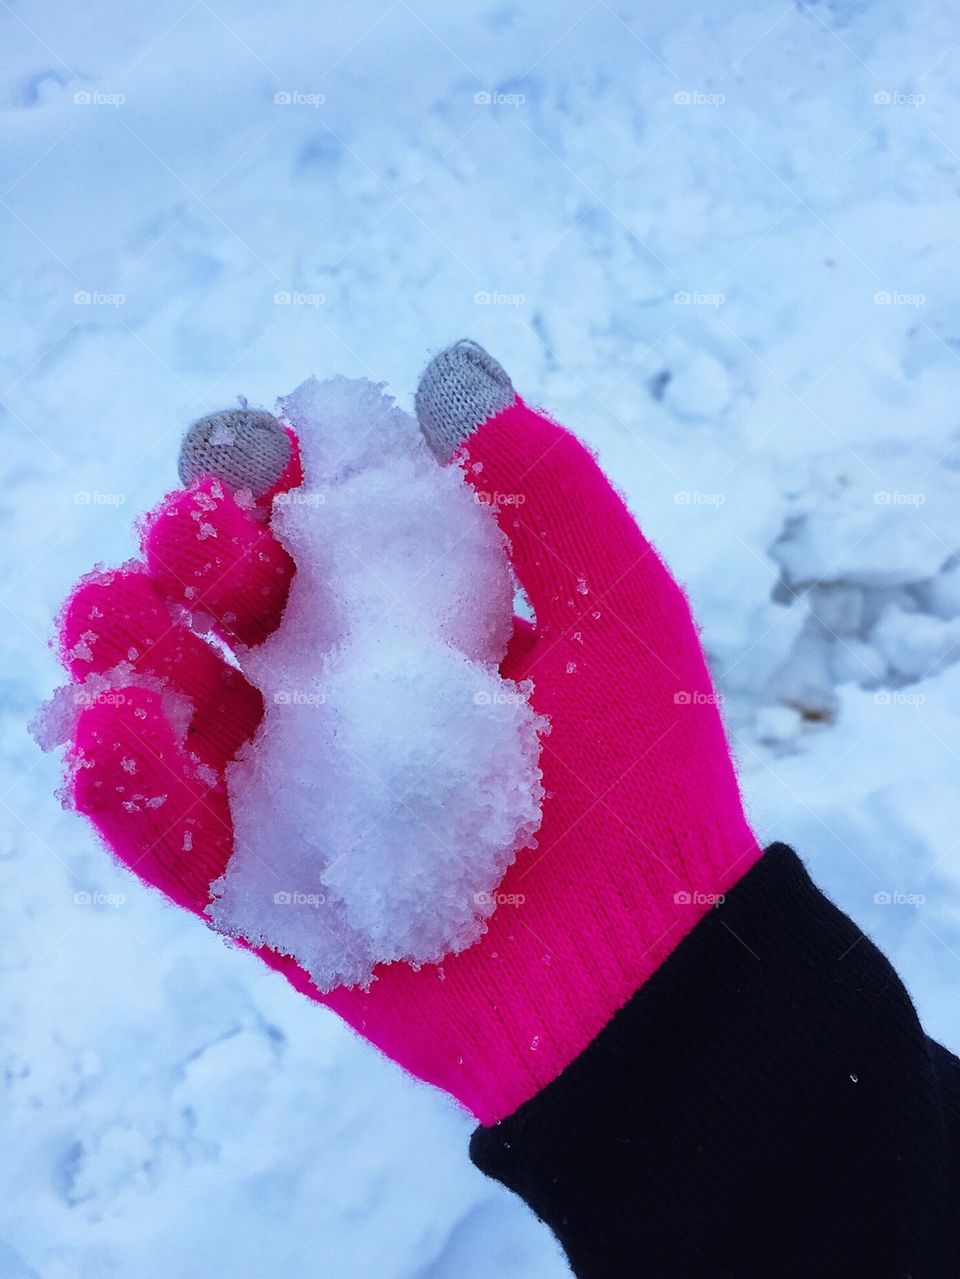 Snow in my hand 